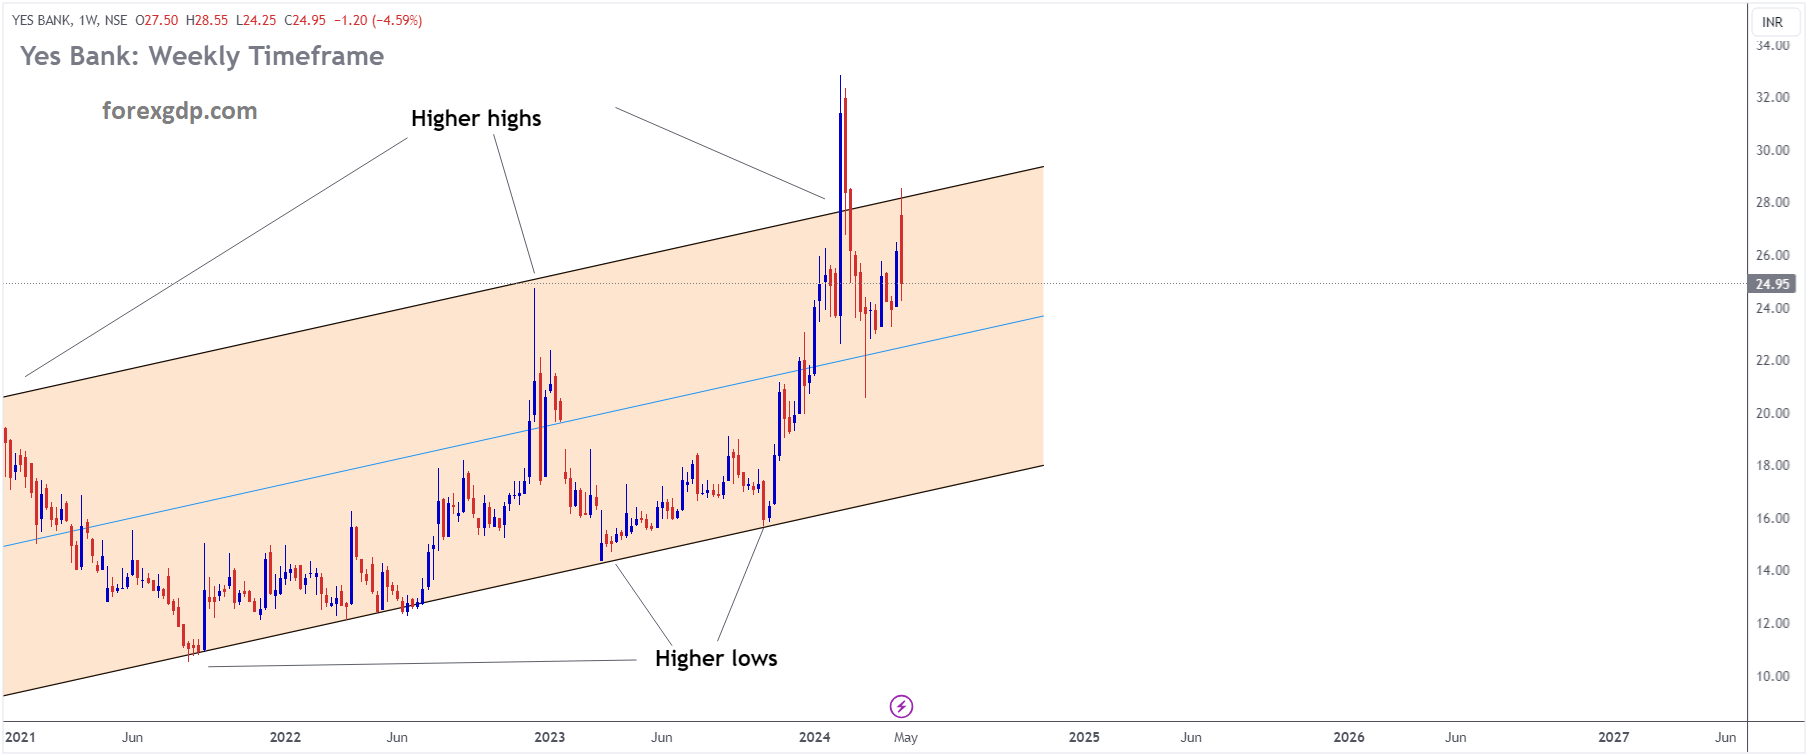 YES BANK Market Price is moving in Ascending channel and market has reached higher high area of the channel